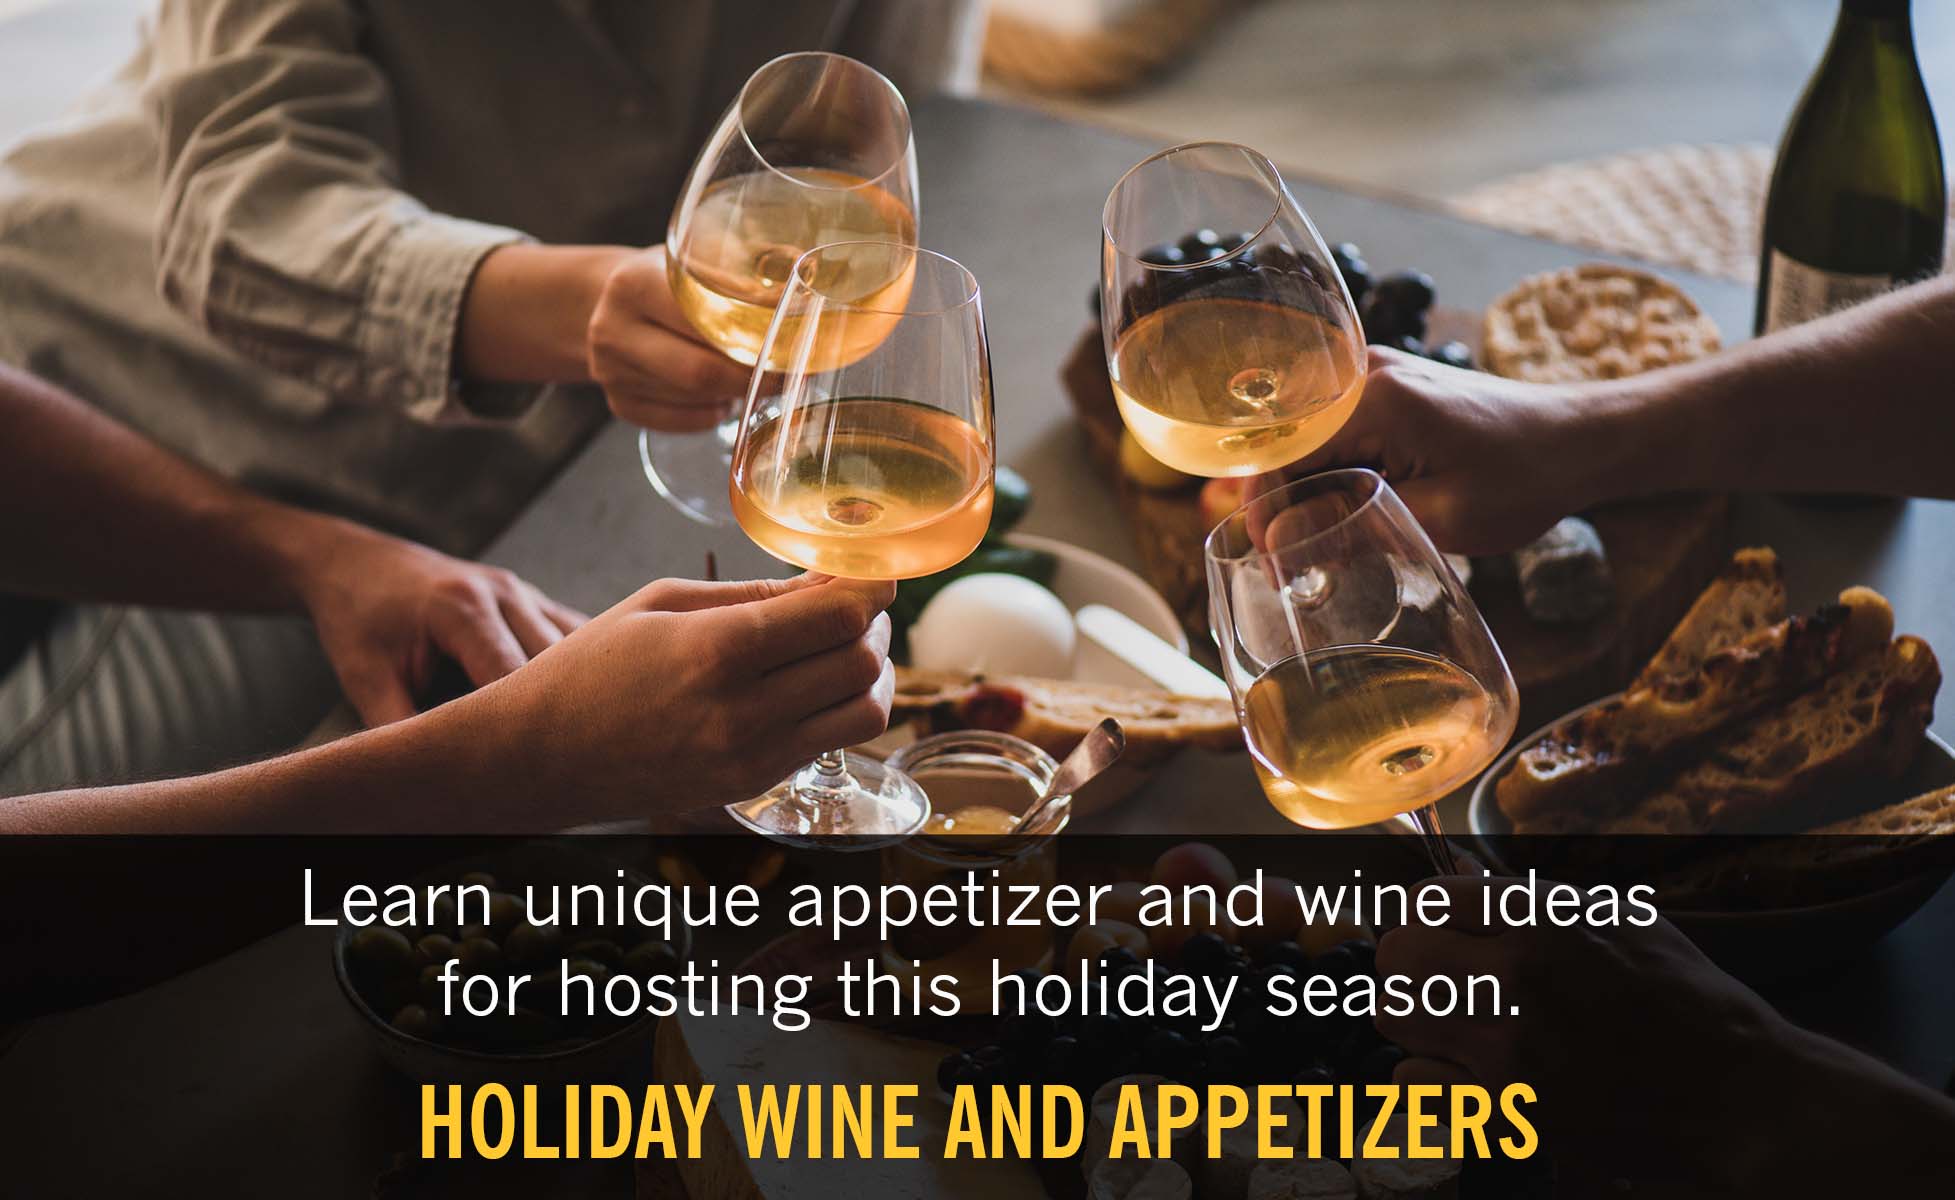 Holiday-Wine-and-Appetizers-Graphic.jpg